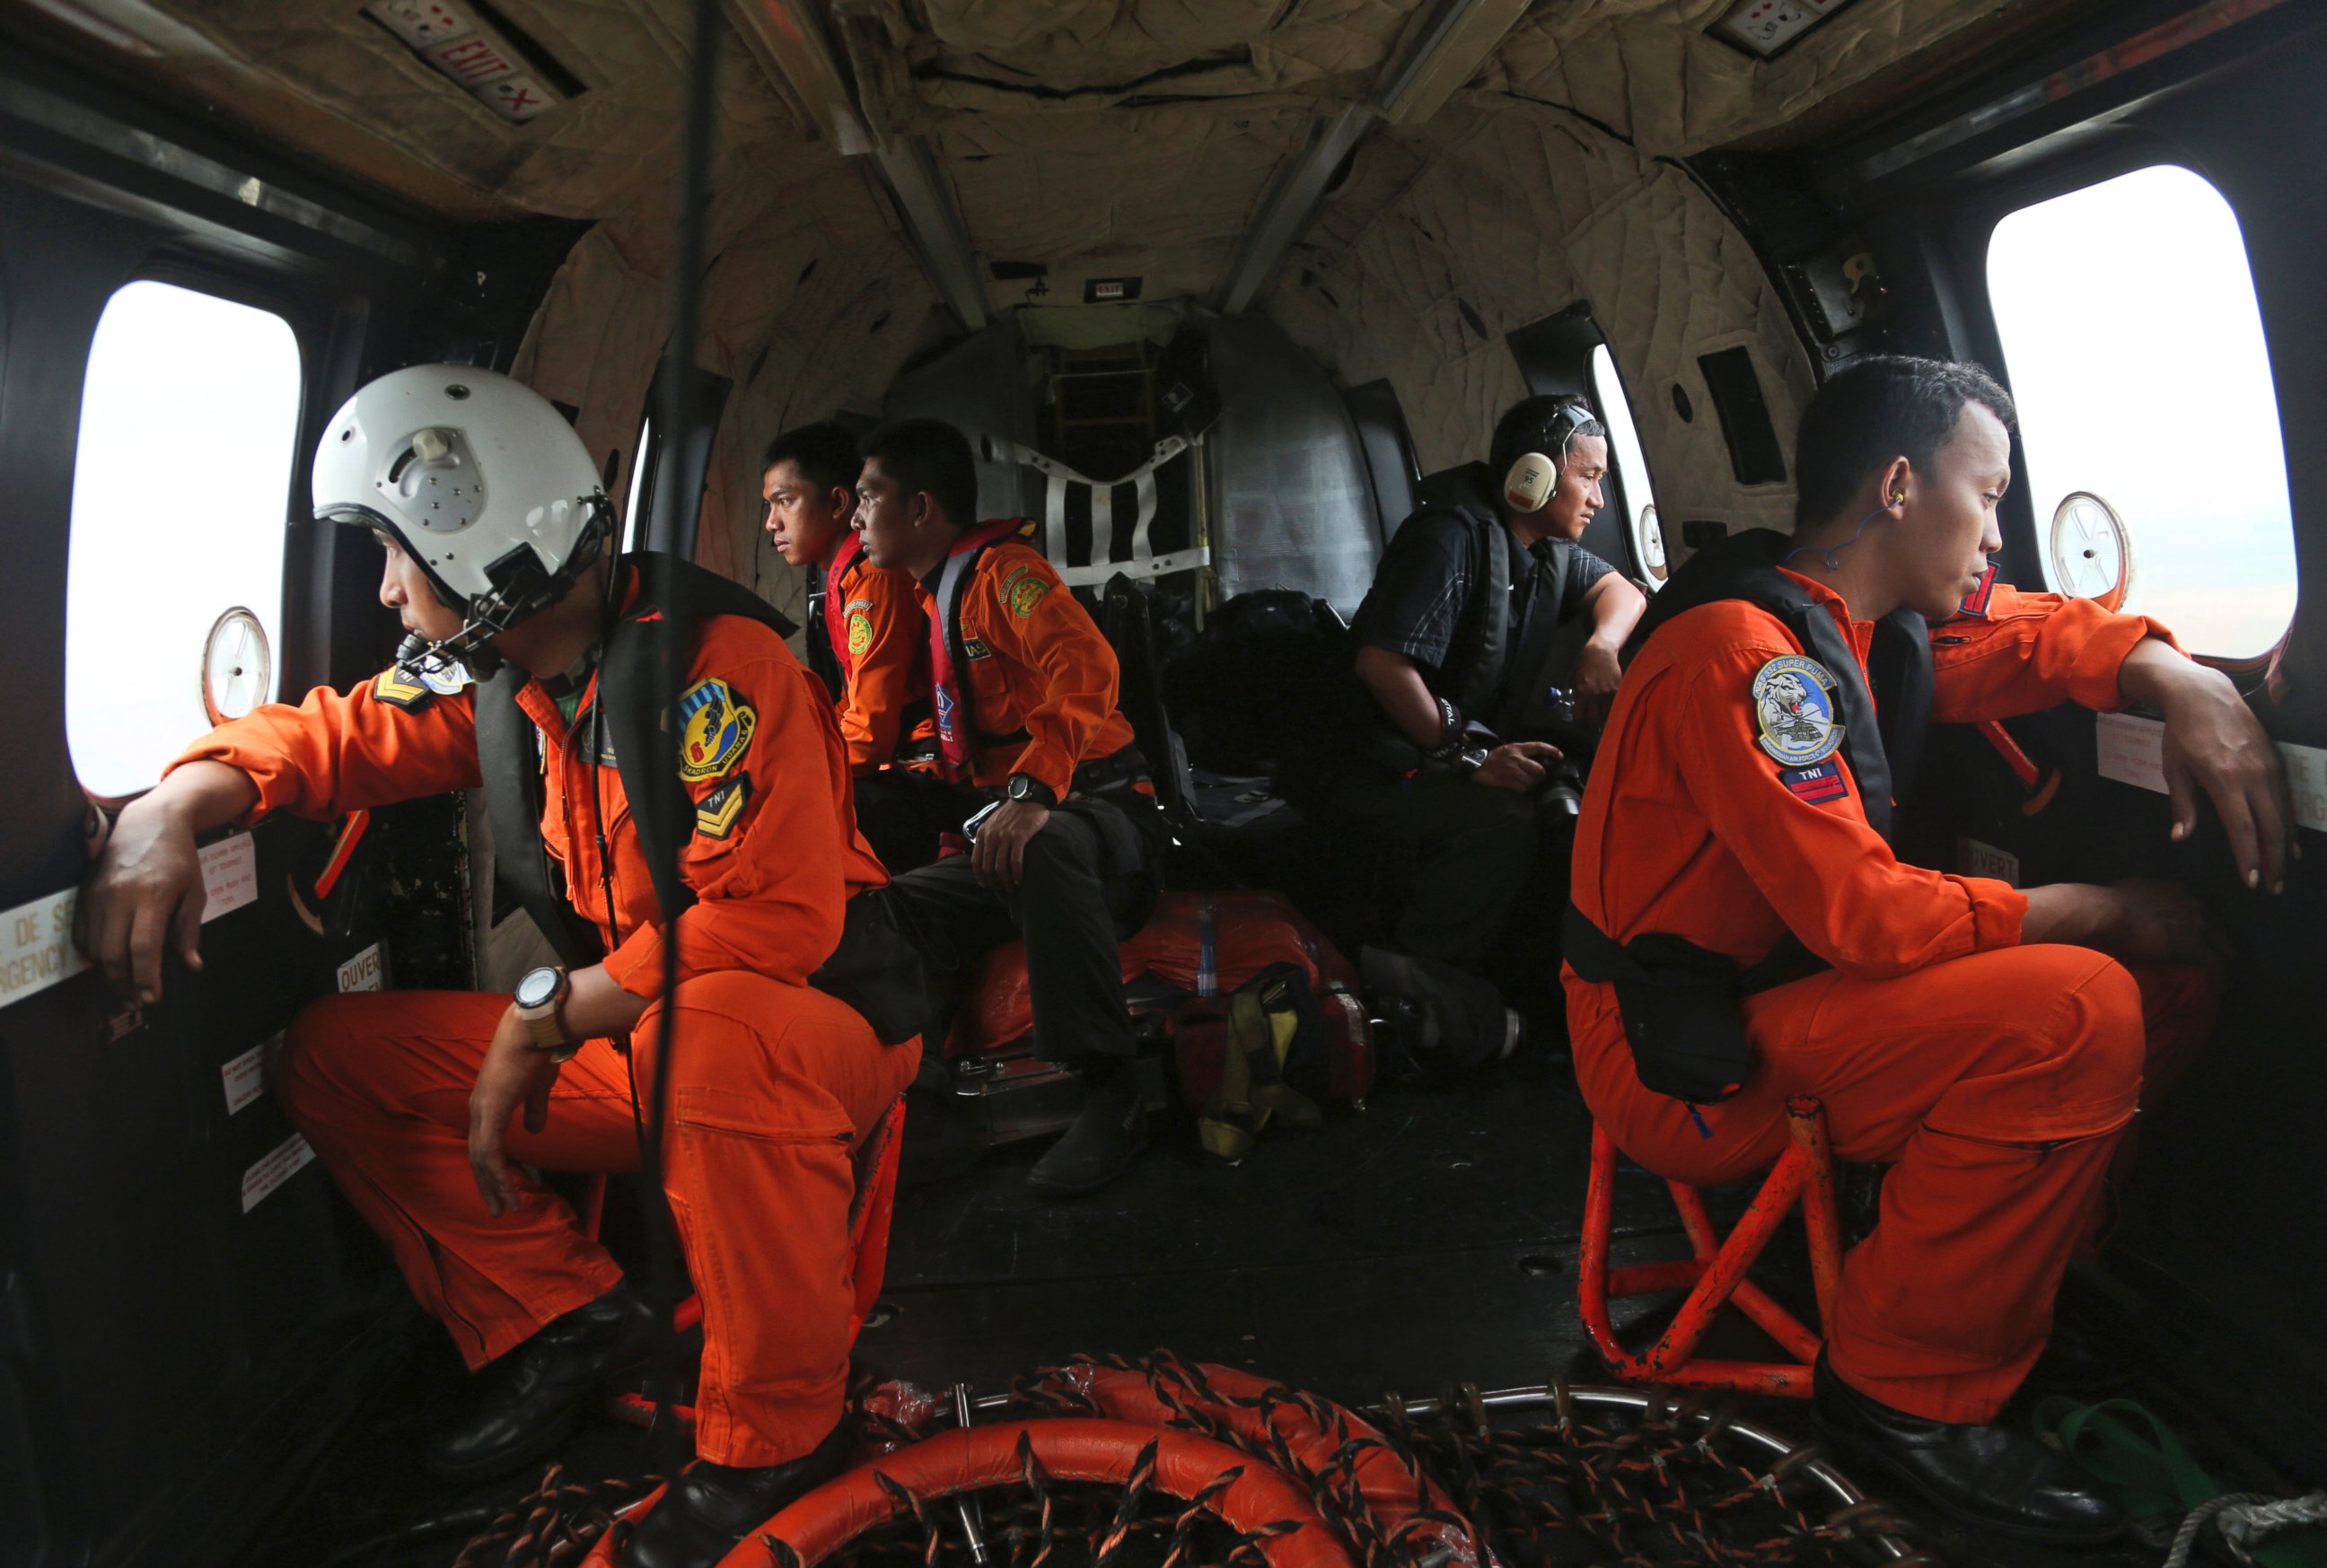 PHOTO: Crewmembers of Indonesian Air Force NAS 332 Super Puma helicopter look out of the windows during a search operation for the victims and wreckage of AirAsia Flight QZ 8501 over the Java Sea, Indonesia, Jan. 5, 2015.